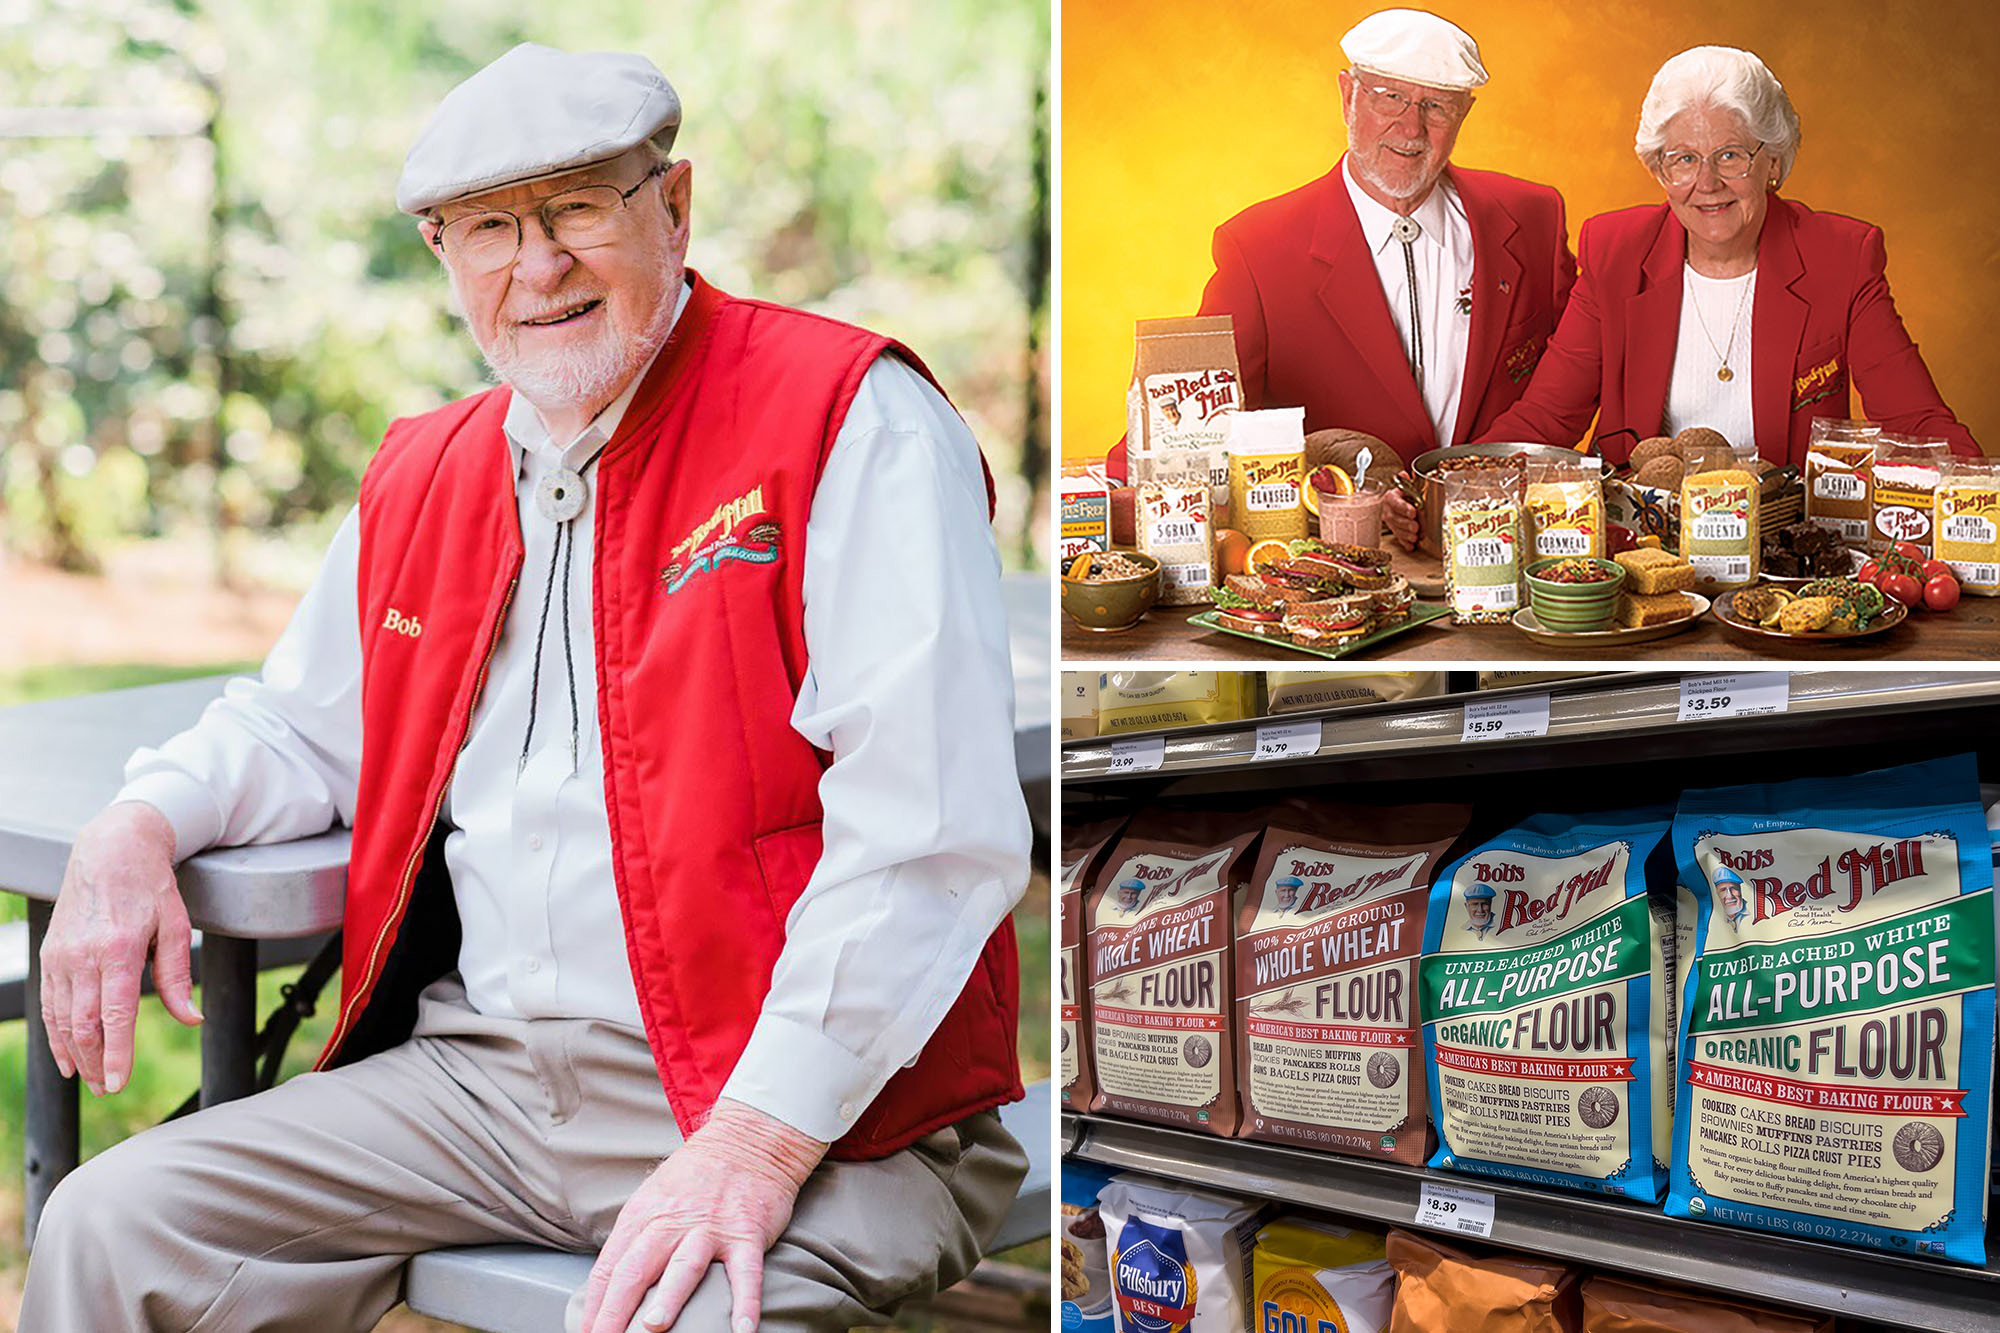 Bob’s Red Mill founder, Bob Moore, dead at 94: ‘Larger-than-life ...